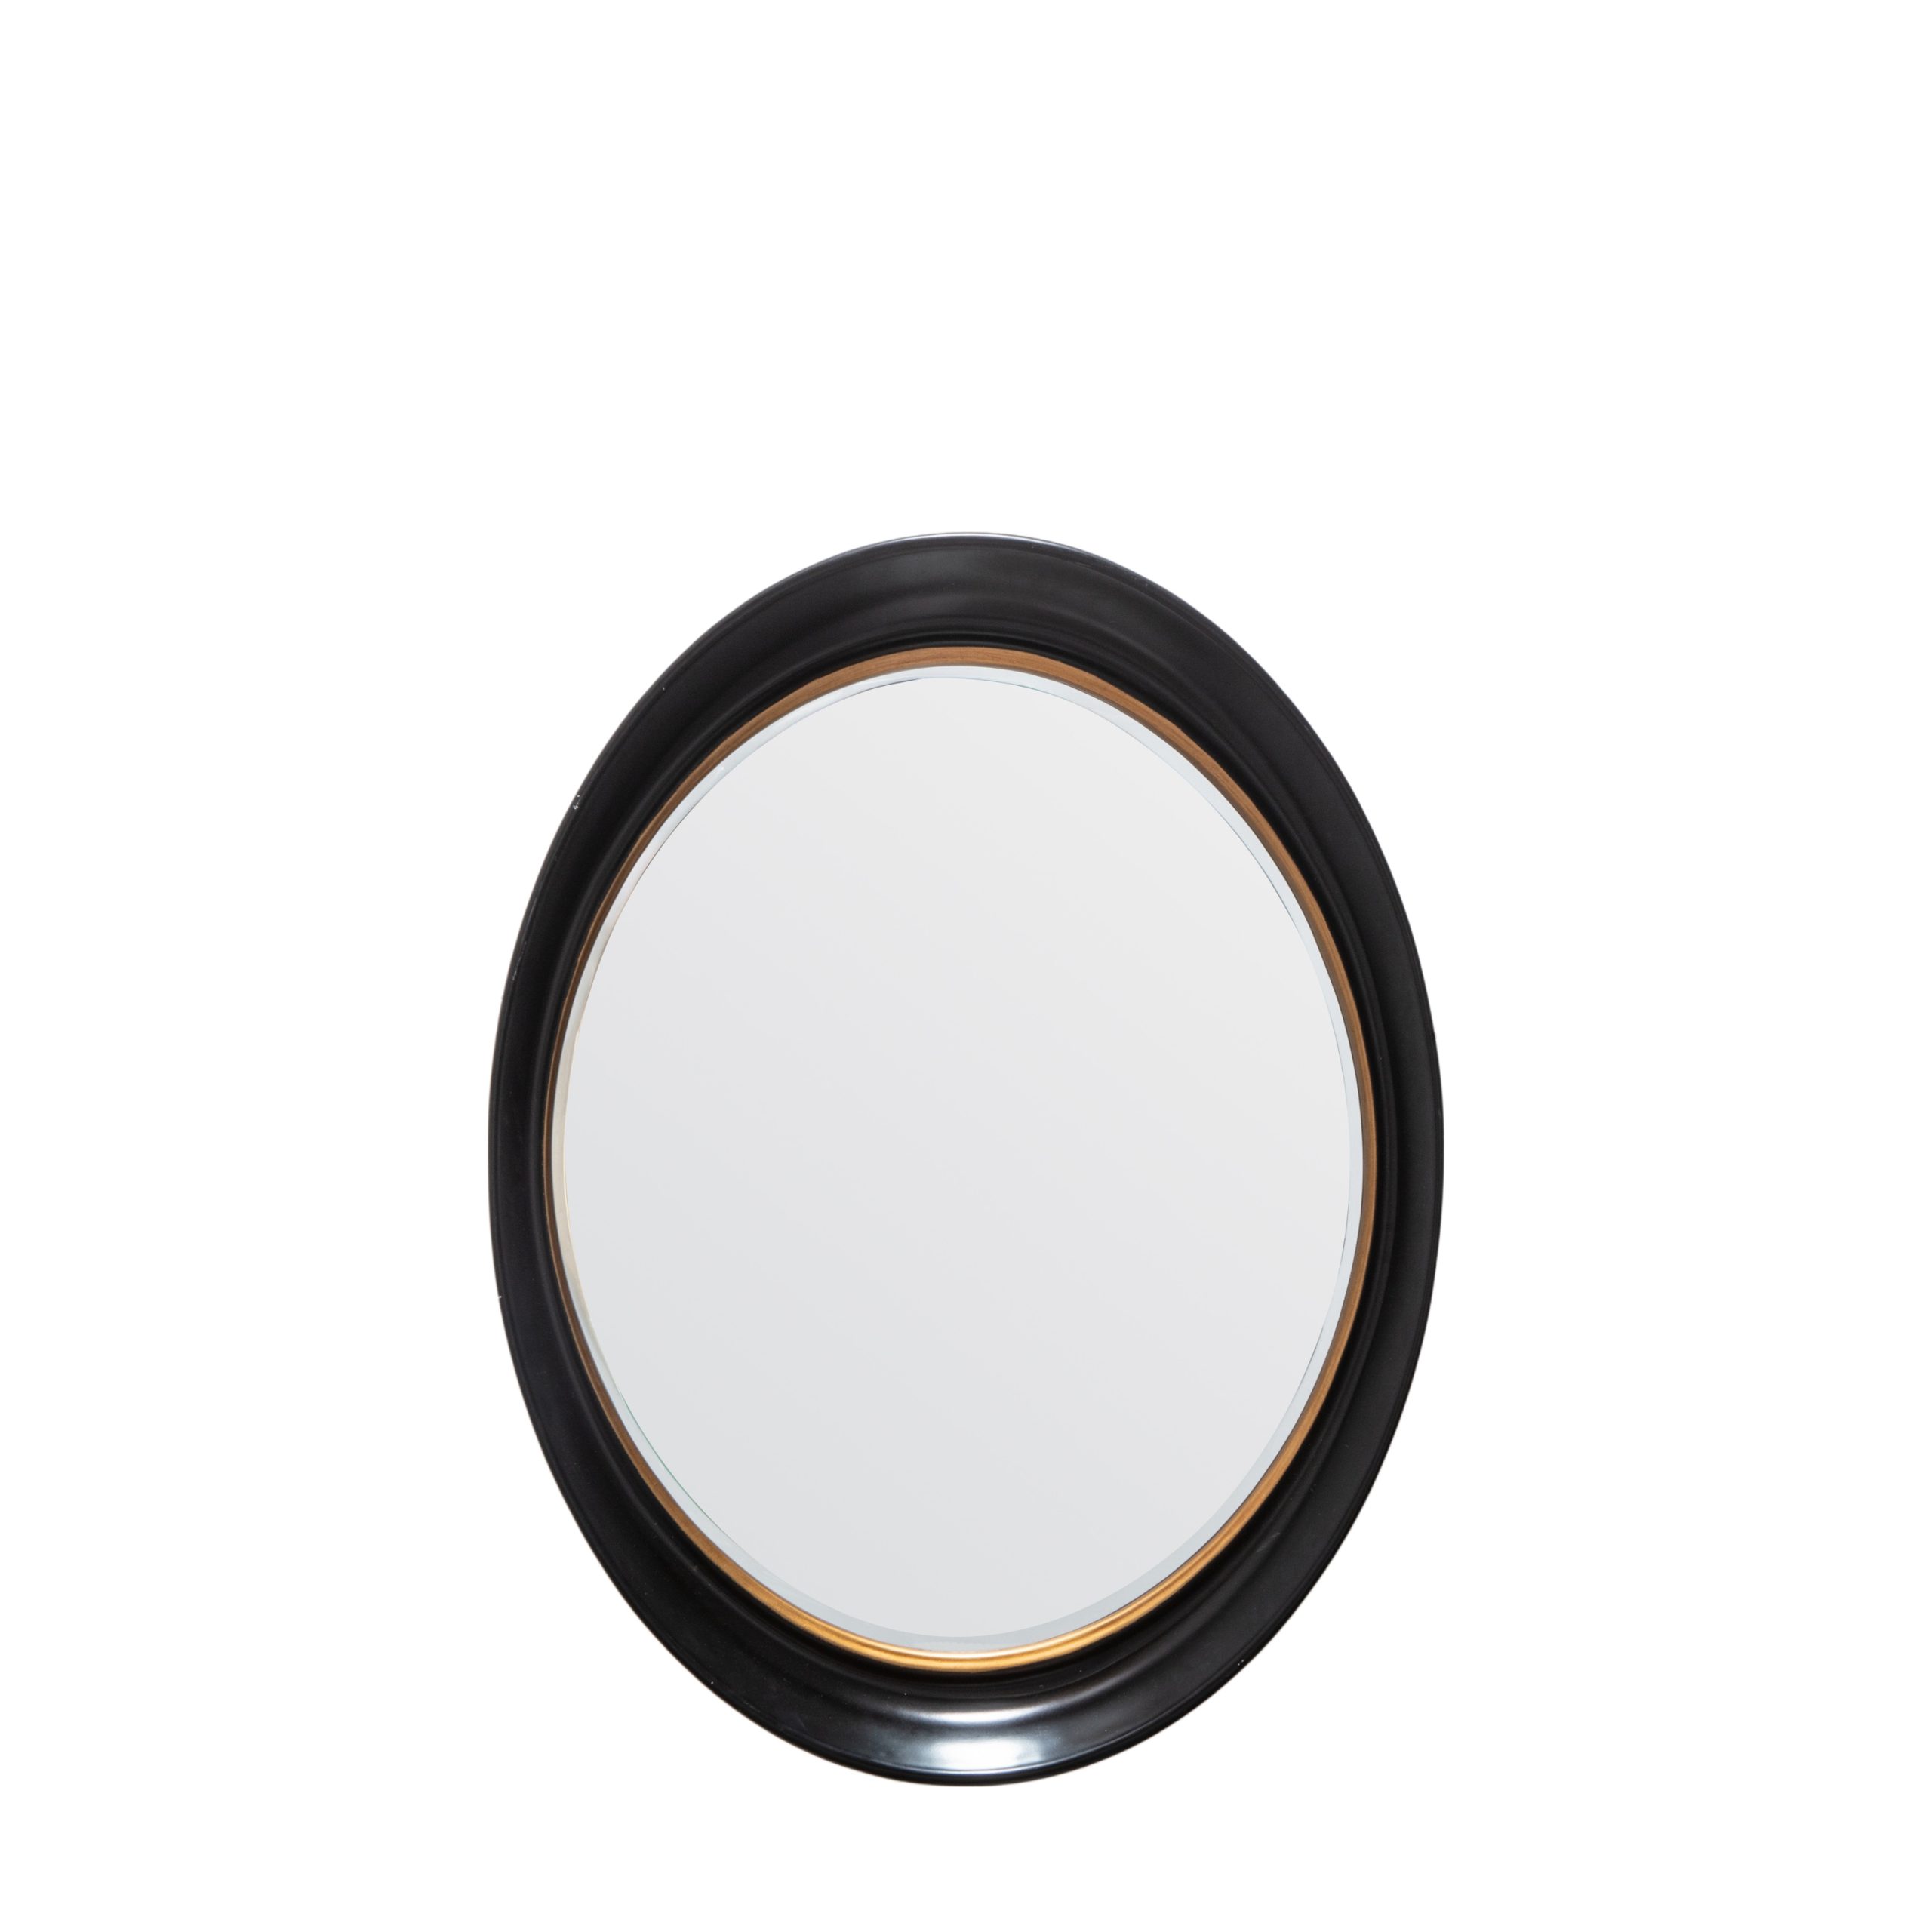 Gallery Direct Fiddock Mirror Black and Gold